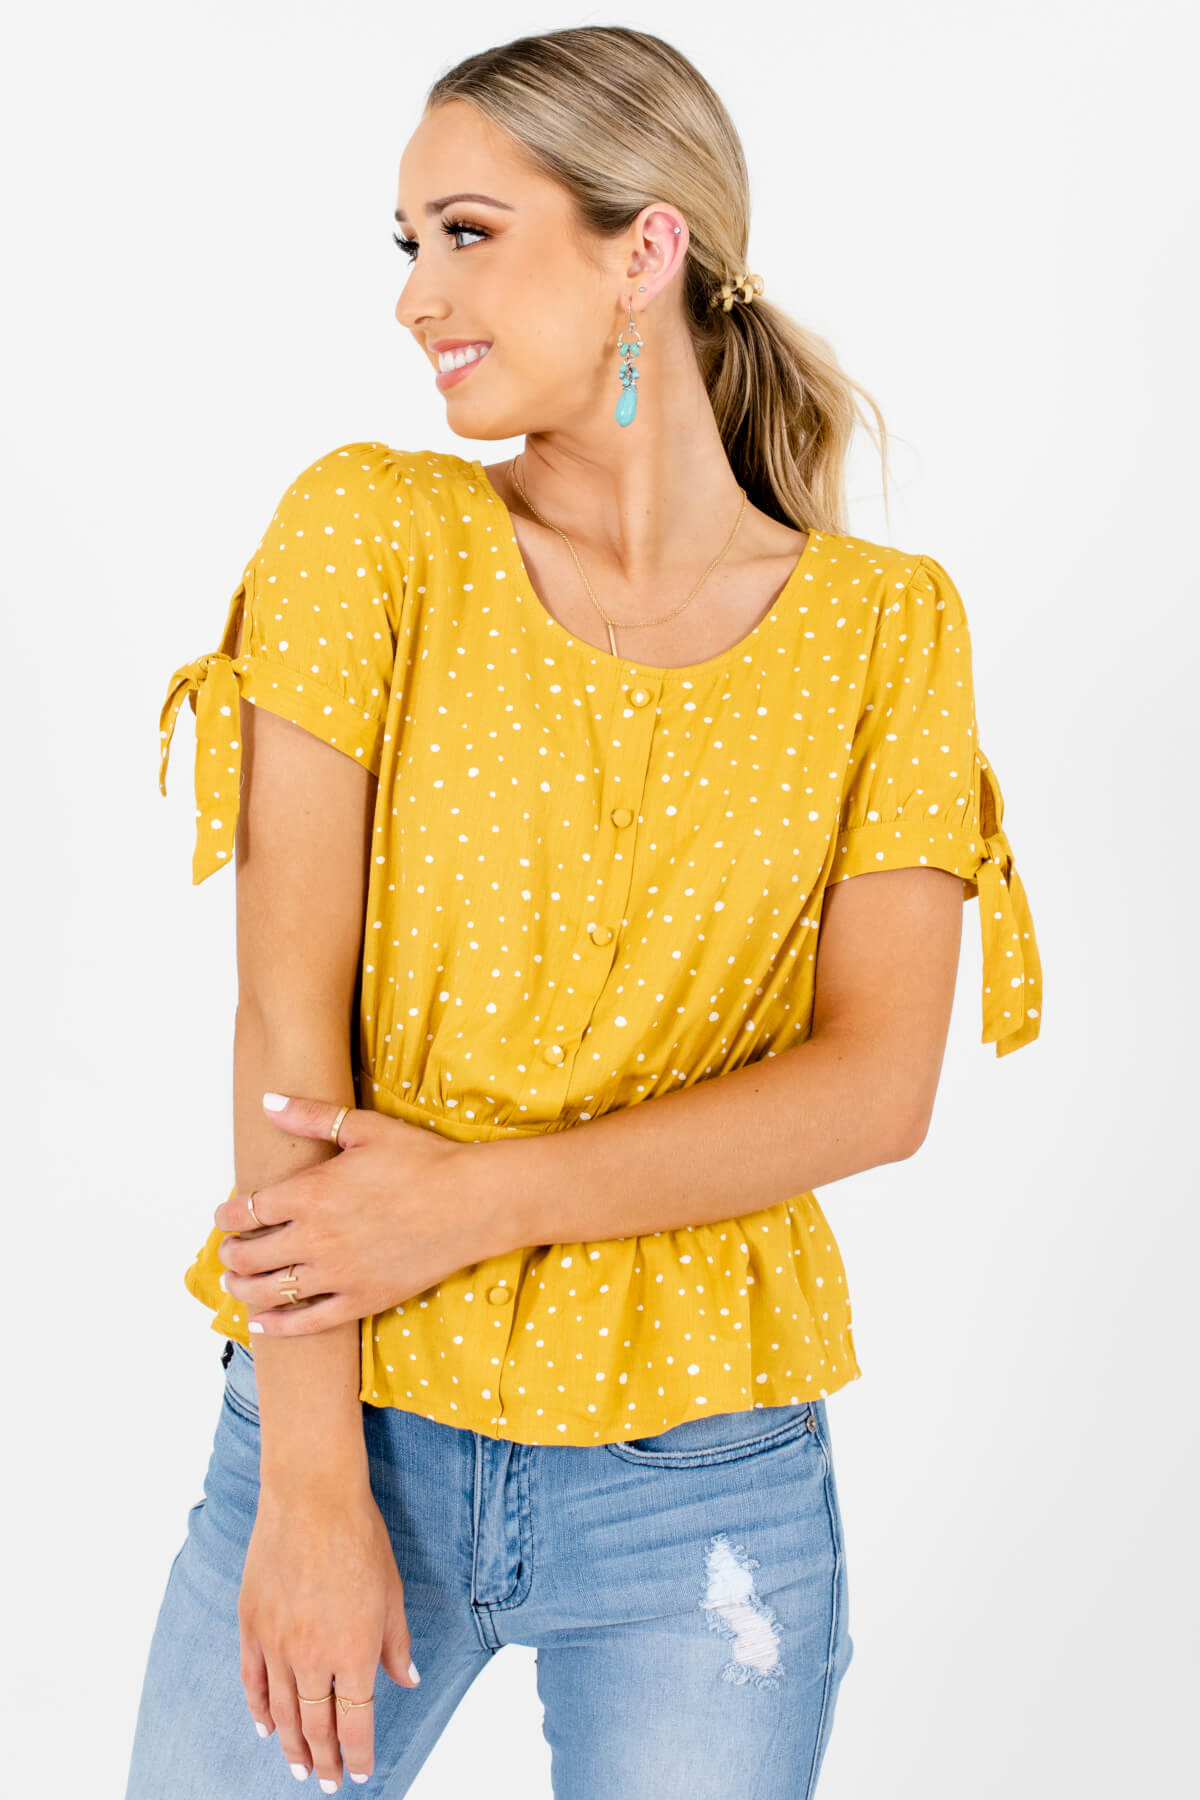 Mustard Yellow Polka Dot Cute and Comfortable Boutique Tops for Women